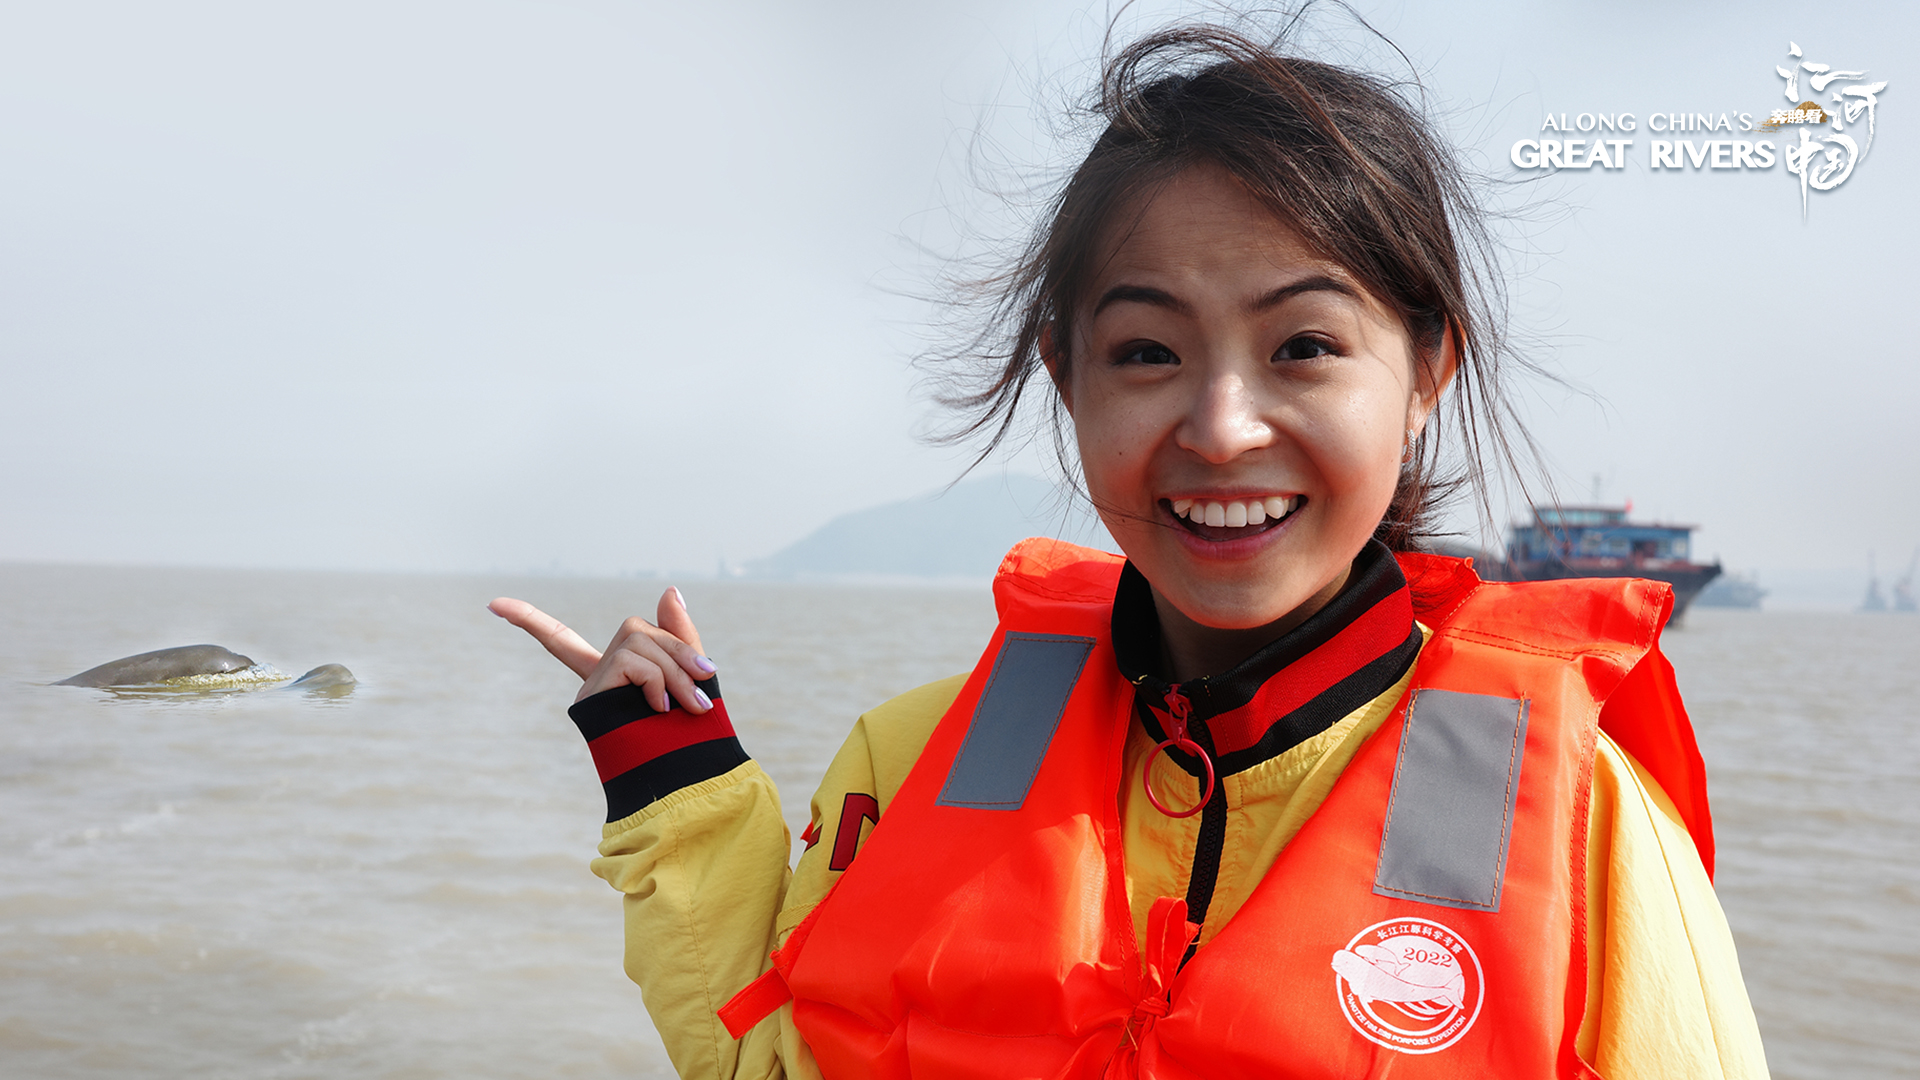 Watch: Join the Yangtze finless porpoise expedition to see the 'smiling angel'